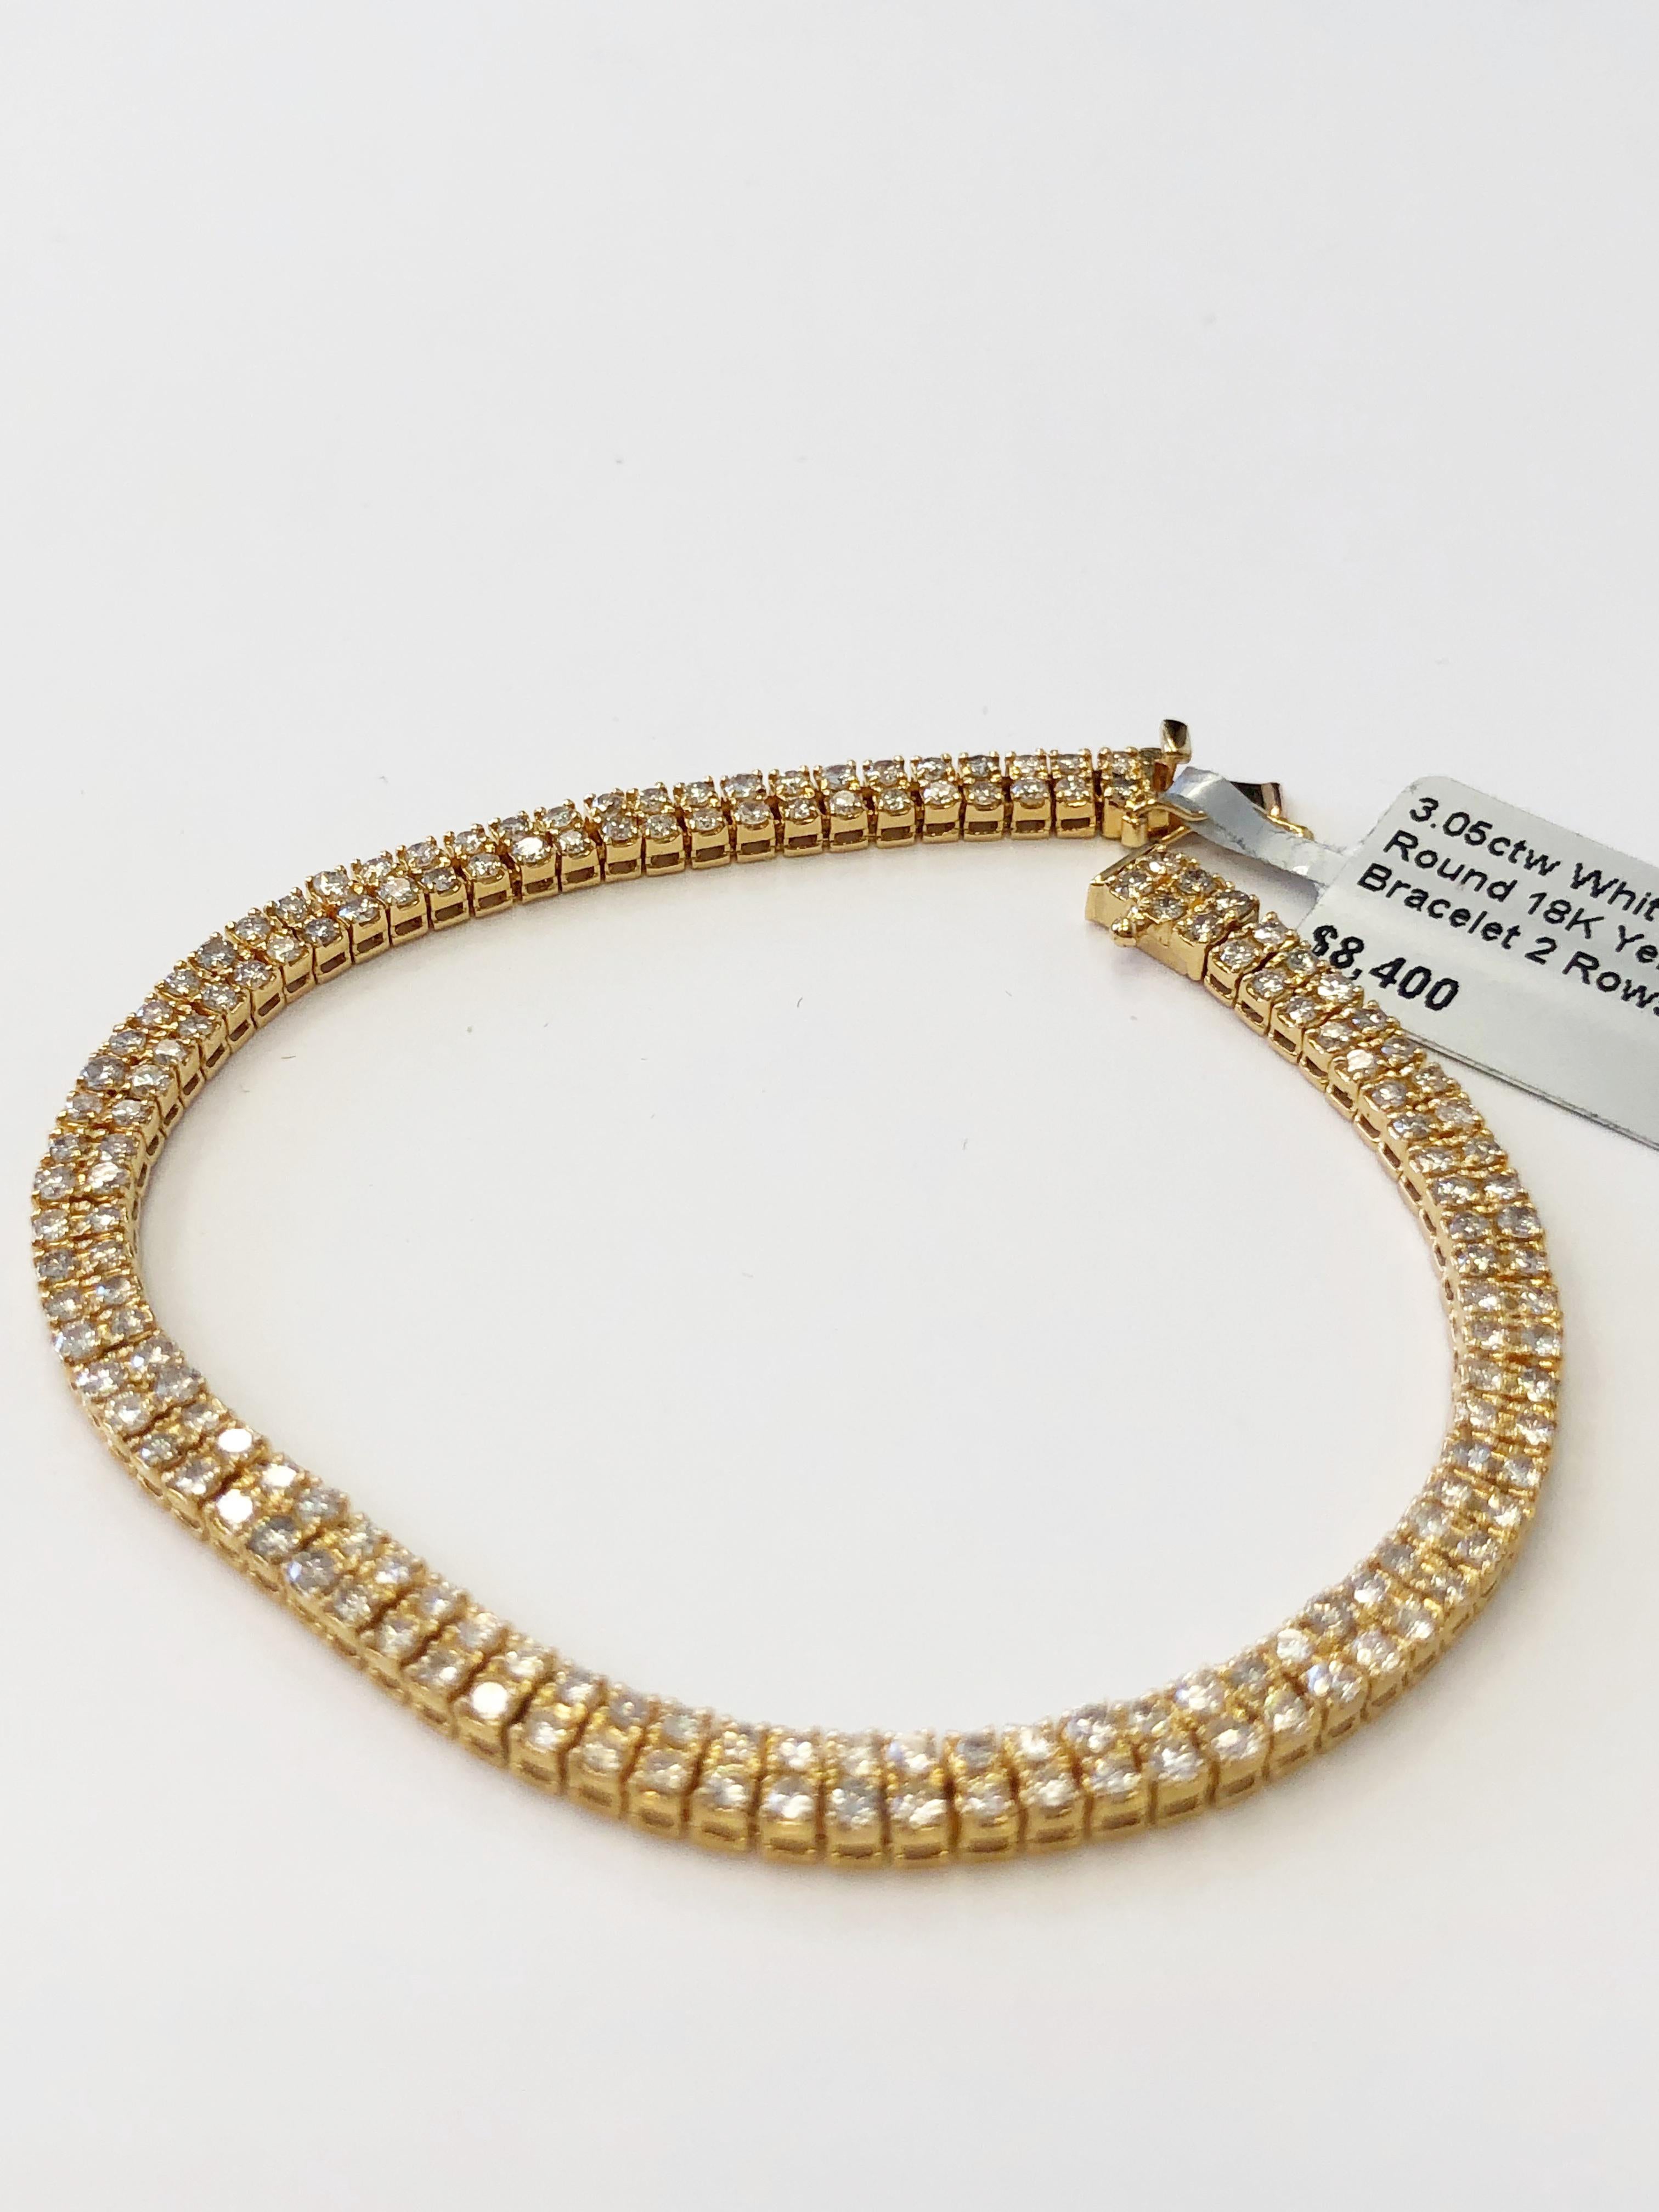 This gorgeous bracelet has two rows of good quality, bright and white diamond rounds weighing 3.05 carats. Handmade 18k yellow gold mounting that is both flexible and dainty.  Length of bracelet is 7.5 inches.  Perfect for stacking or wearing on